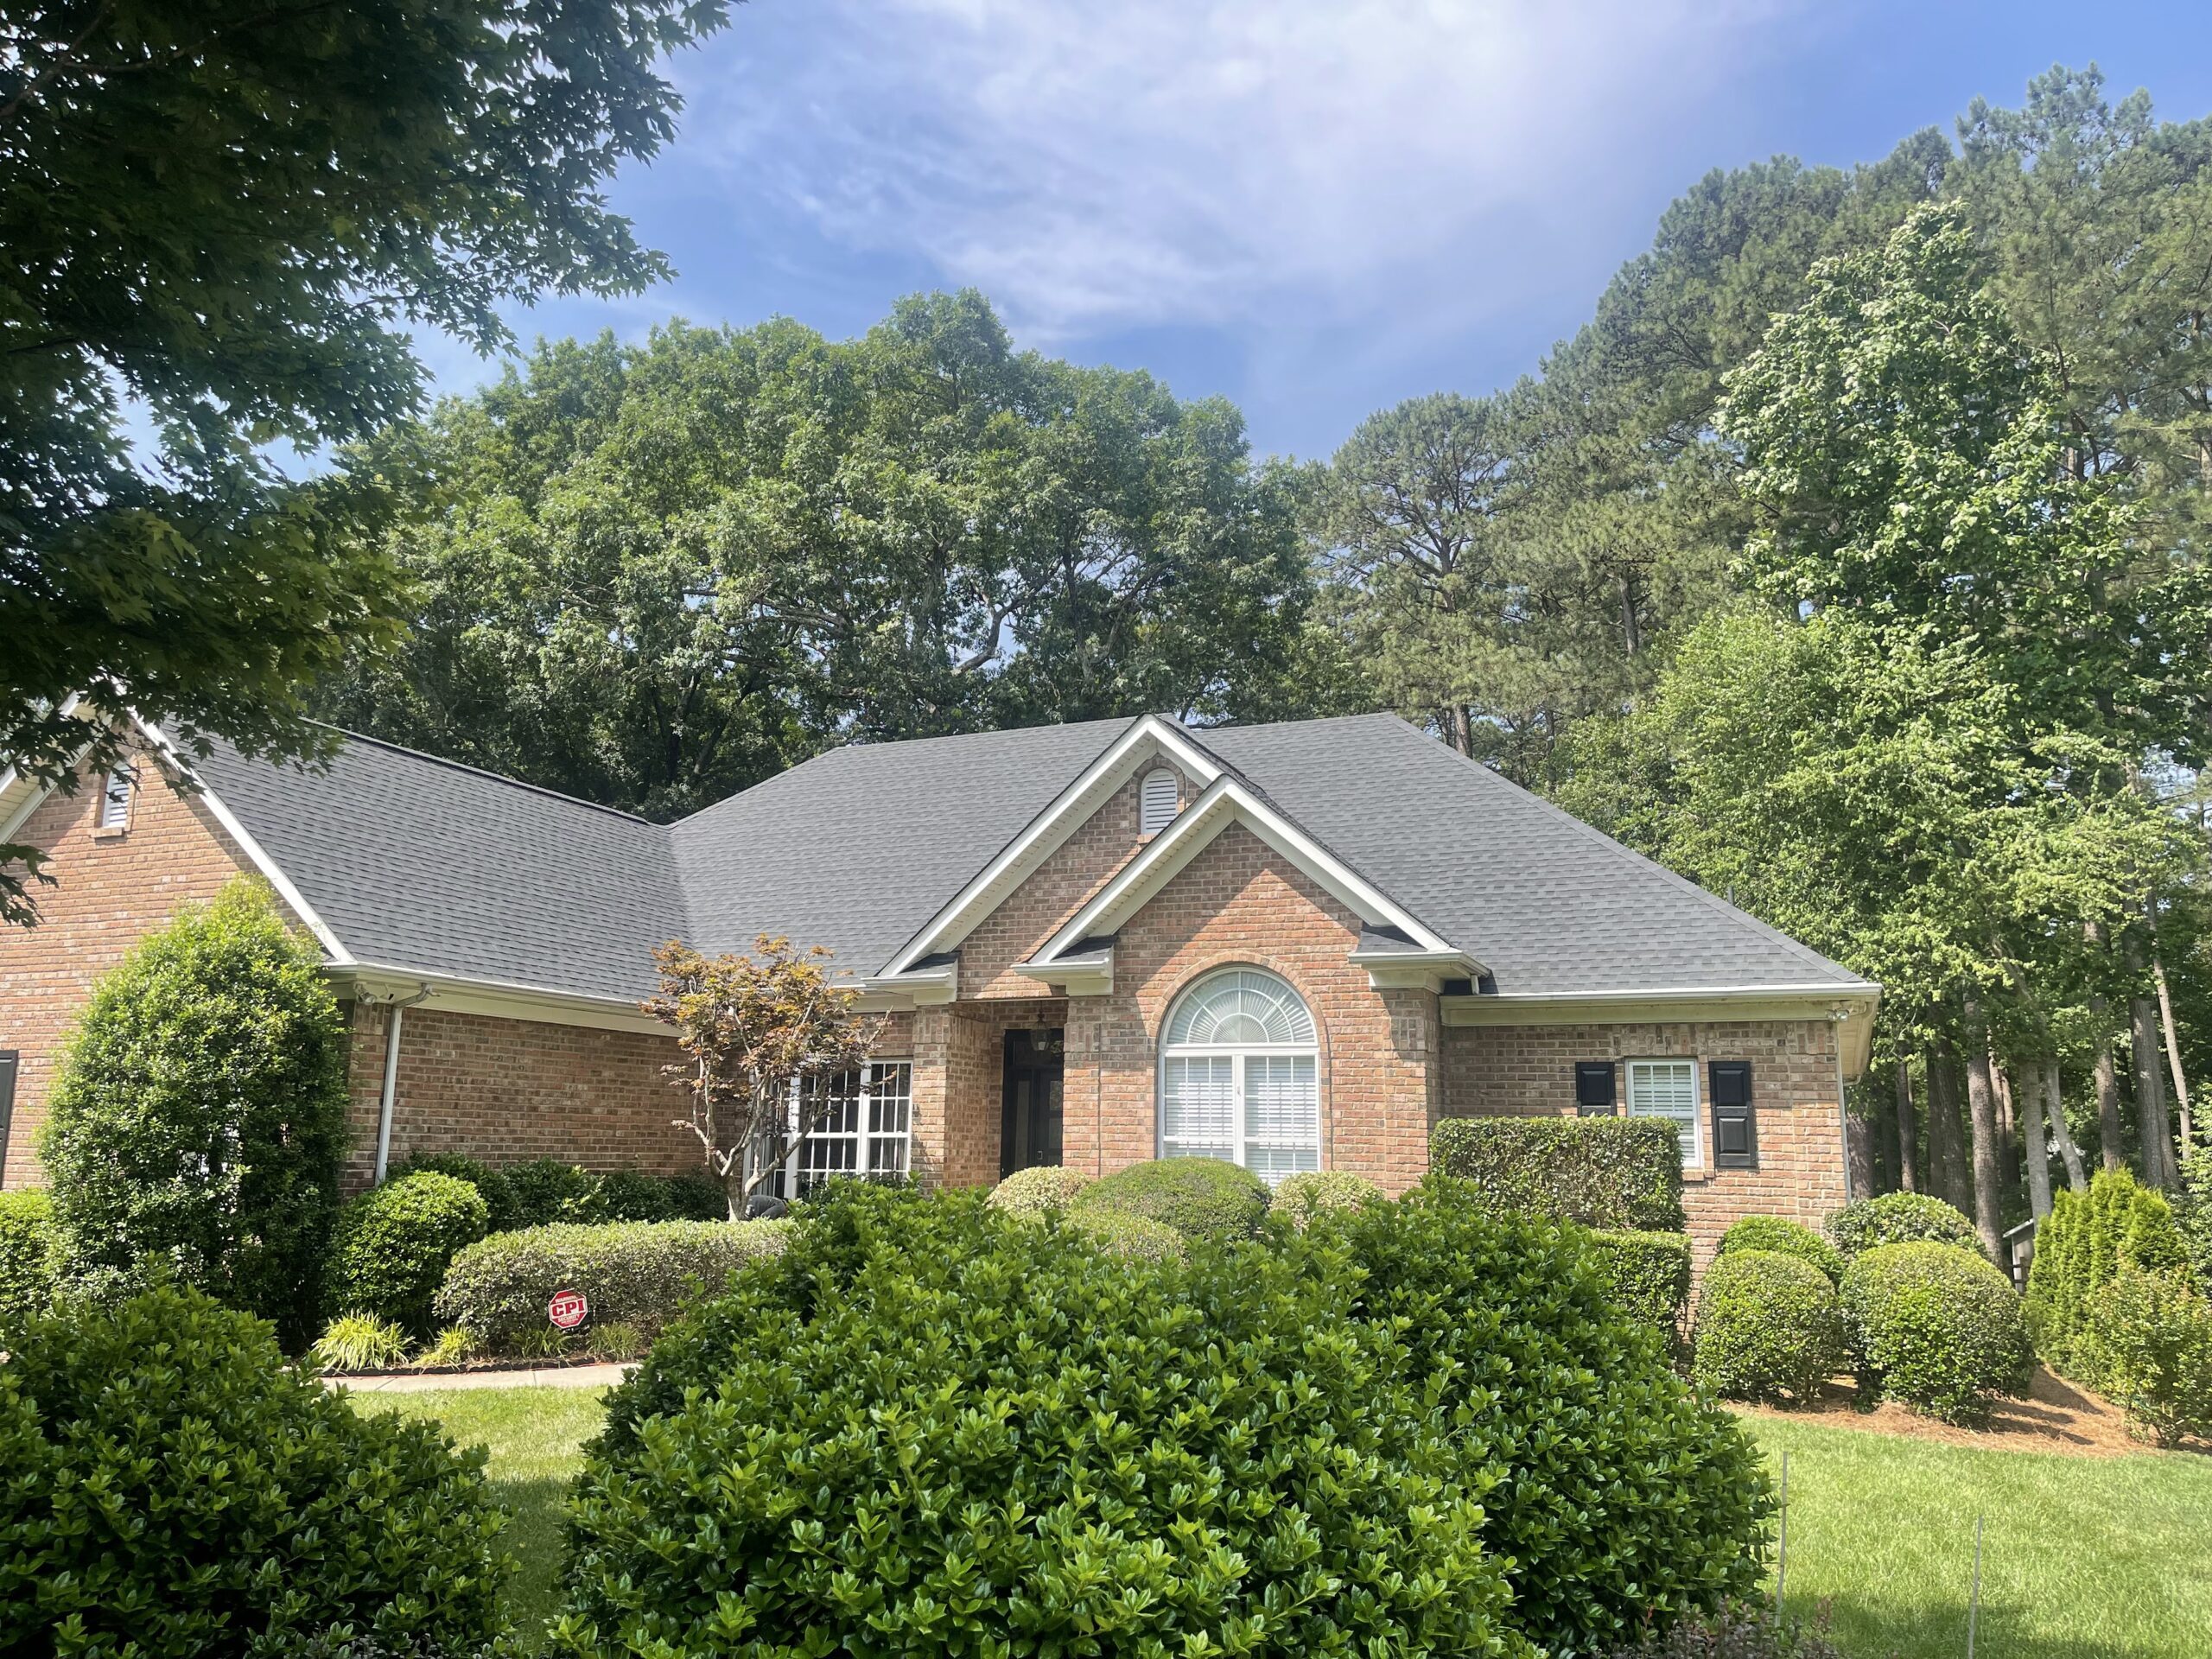 Featured project with new GAF Timberline high definition HDZ Charcoal roof shingles in Mooresville NC